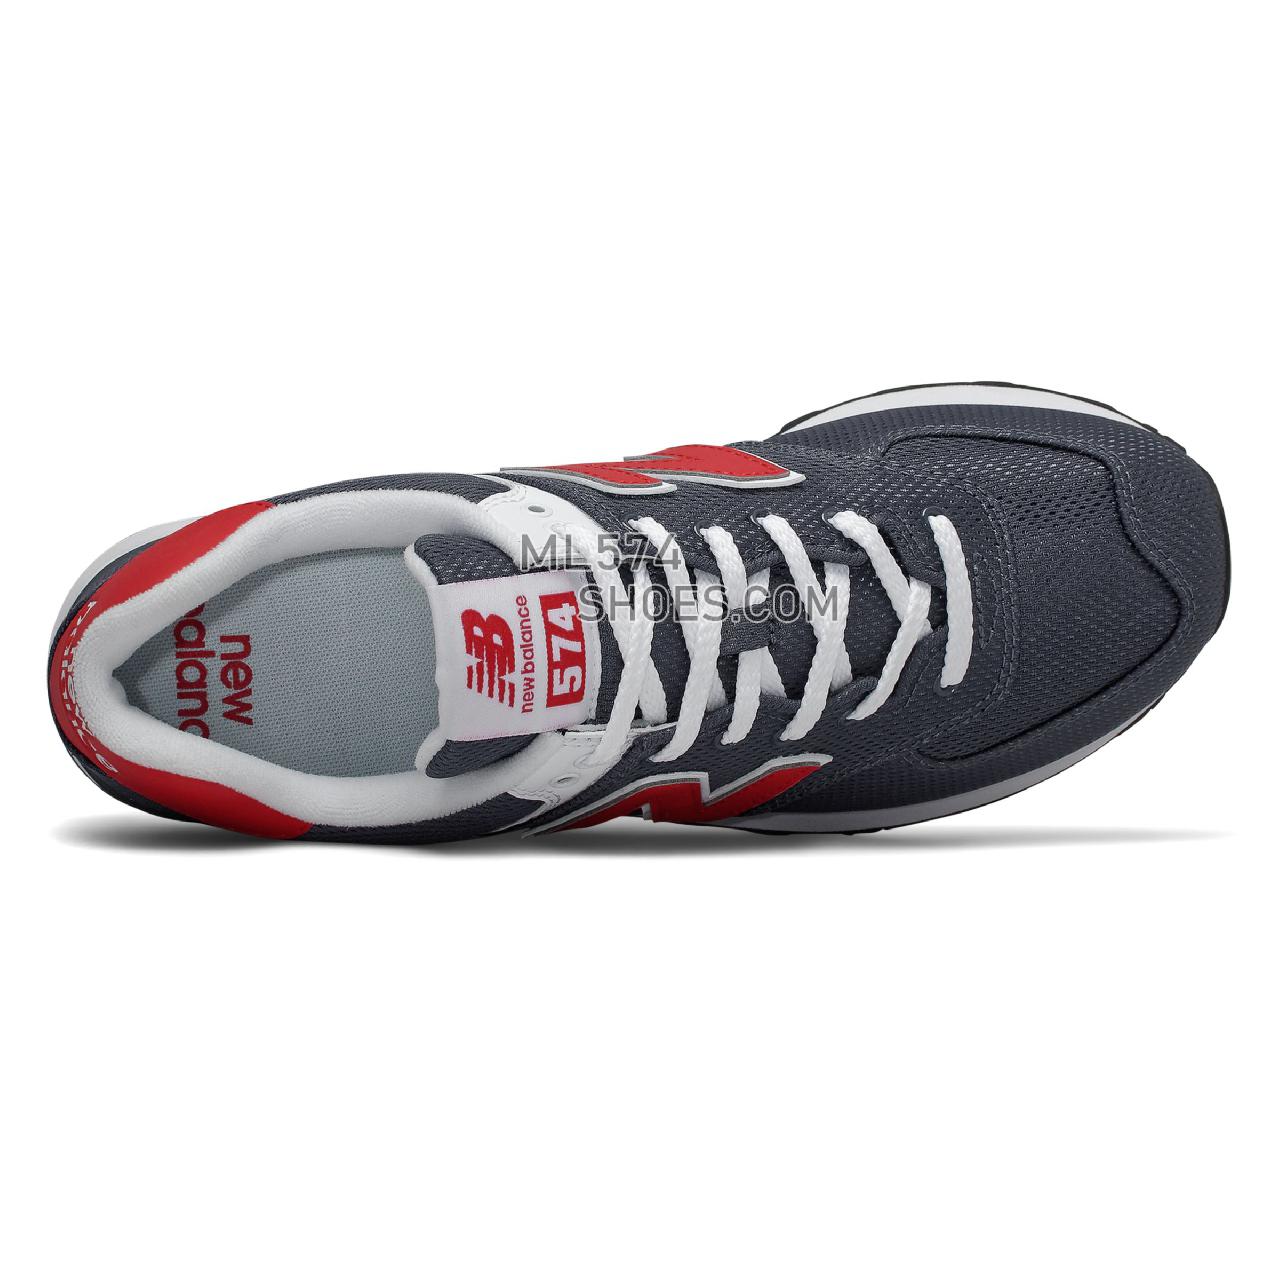 New Balance 574 - Men's Classic Sneakers - Thunder with Team Red - ML574SCJ